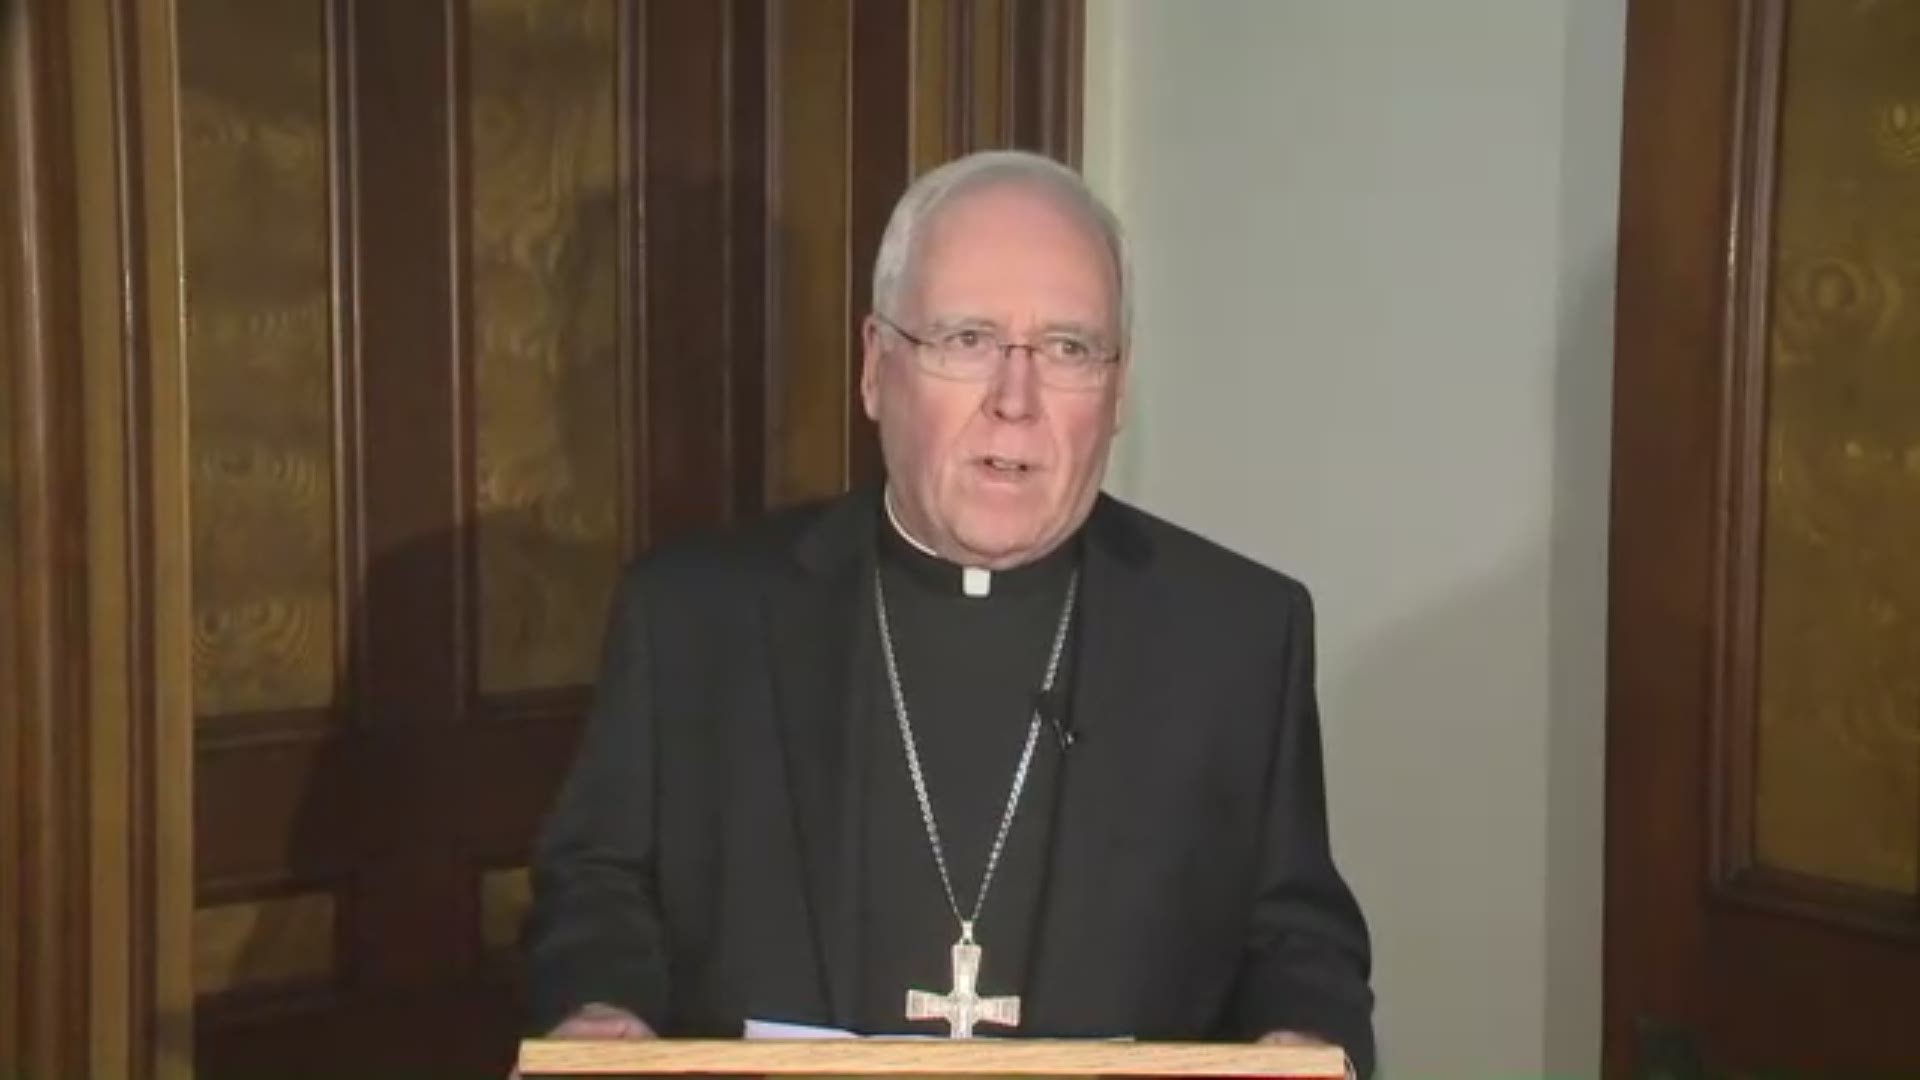 Bishop Richard Malone held a press conference Wednesday to address on going issues within the Catholic Diocese of Buffalo. 

Malone reiterated that he has no plans on resigning.